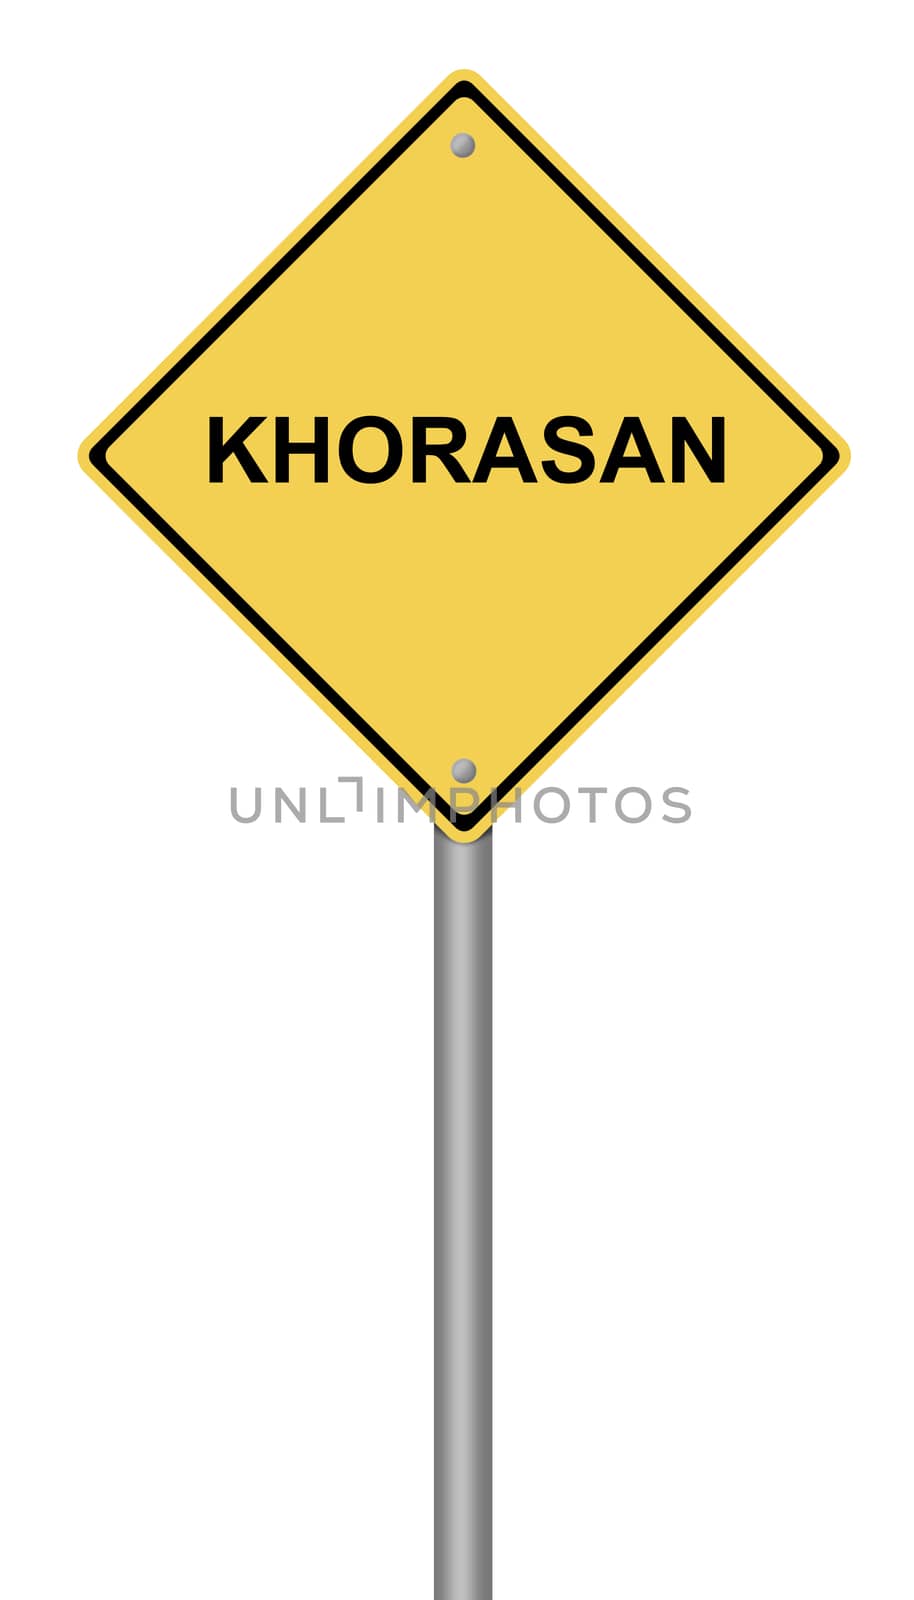 Yellow warning sign with the text KHORASAN on white background.